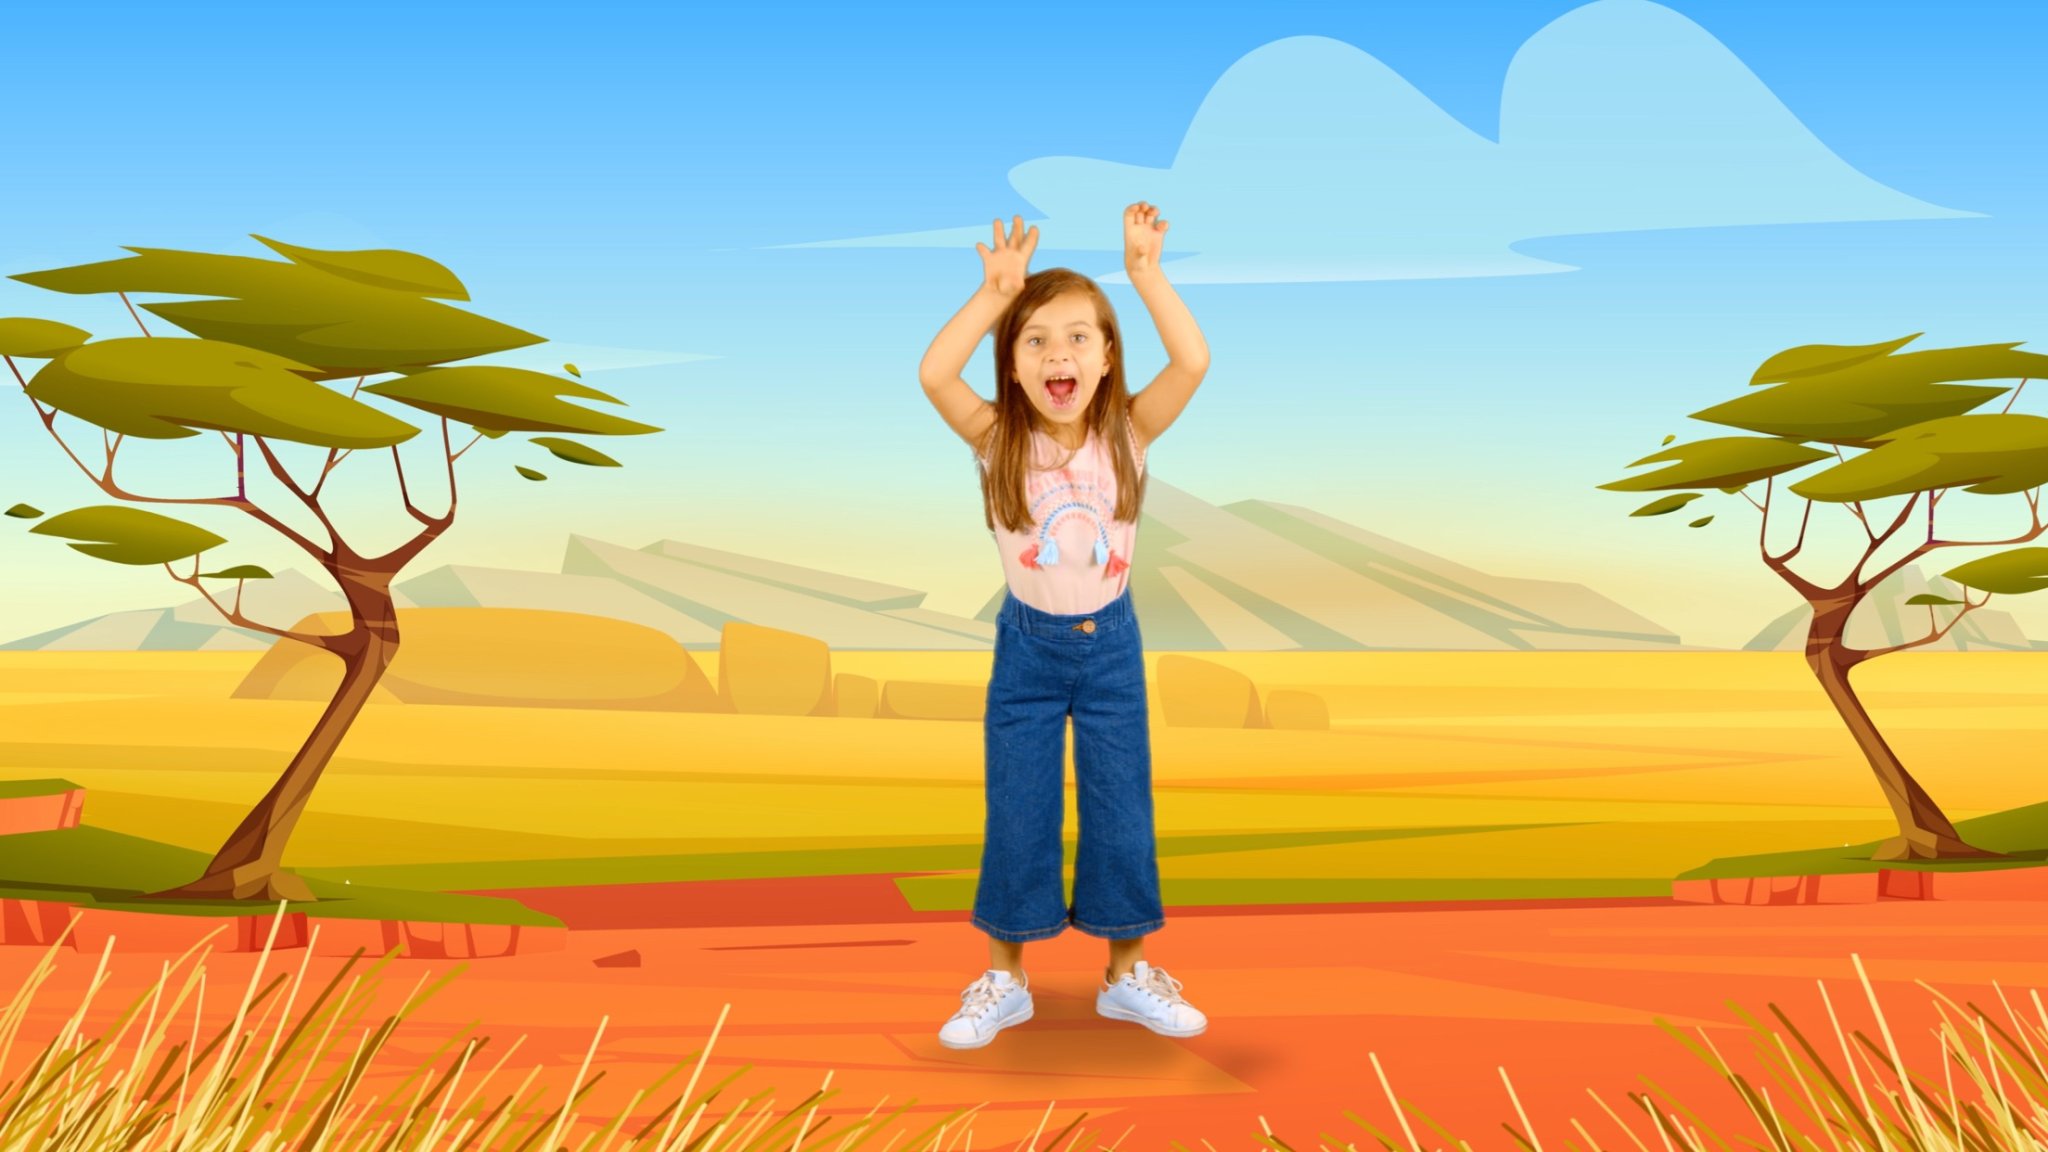 Wakeout Kids Help Make Exercise Fun for Both Children and Parents